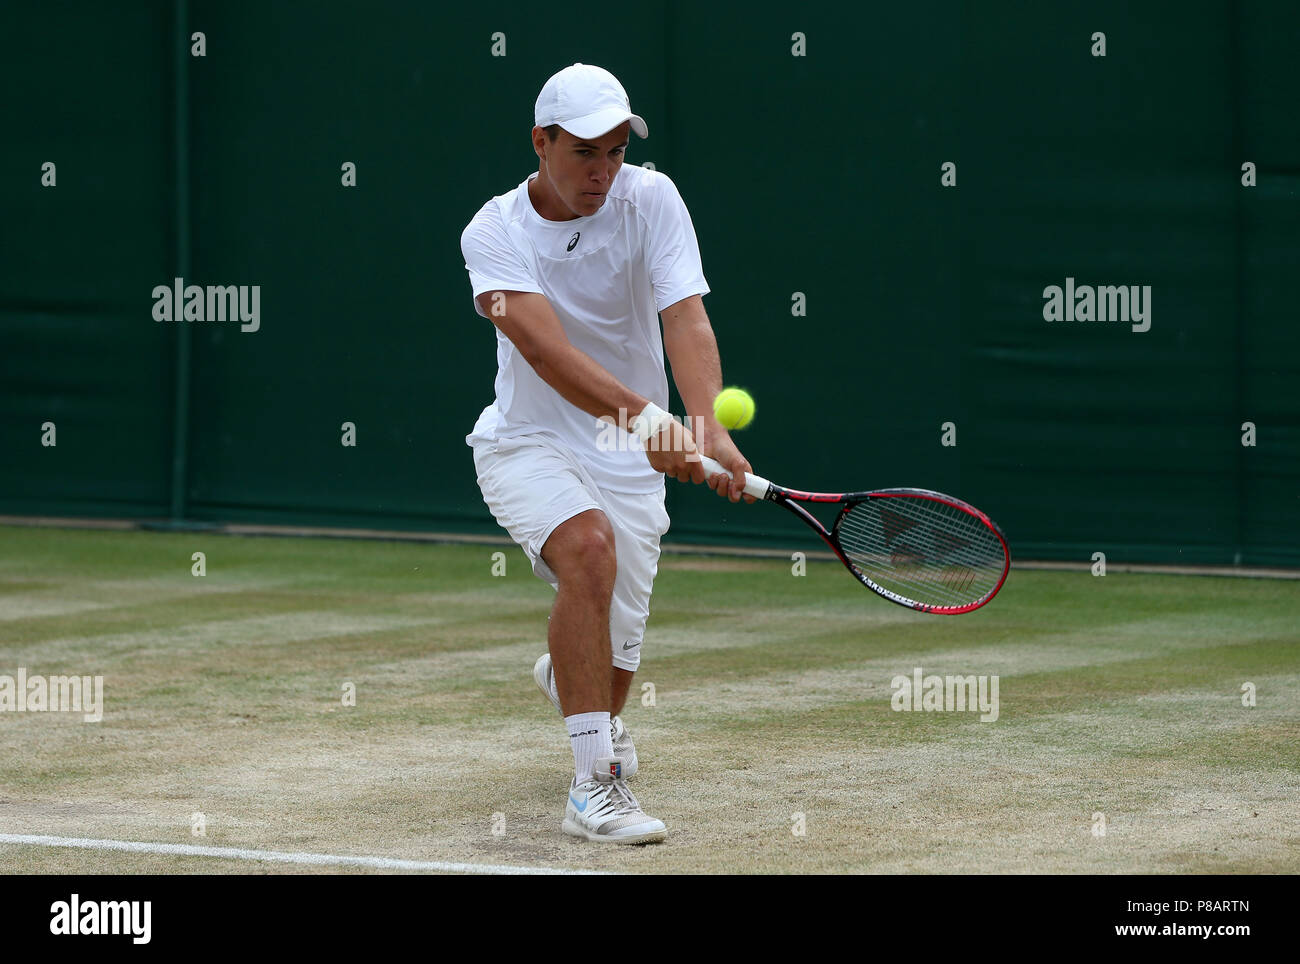 Daniel Michalski in action on day eight of the Wimbledon Championships at the All England Lawn Tennis and Croquet Club, Wimbledon. PRESS ASSOCIATION Photo. Picture date: Tuesday July 10, 2018. See PA story TENNIS Wimbledon. Photo credit should read: Jonathan Brady/PA Wire. Stock Photo